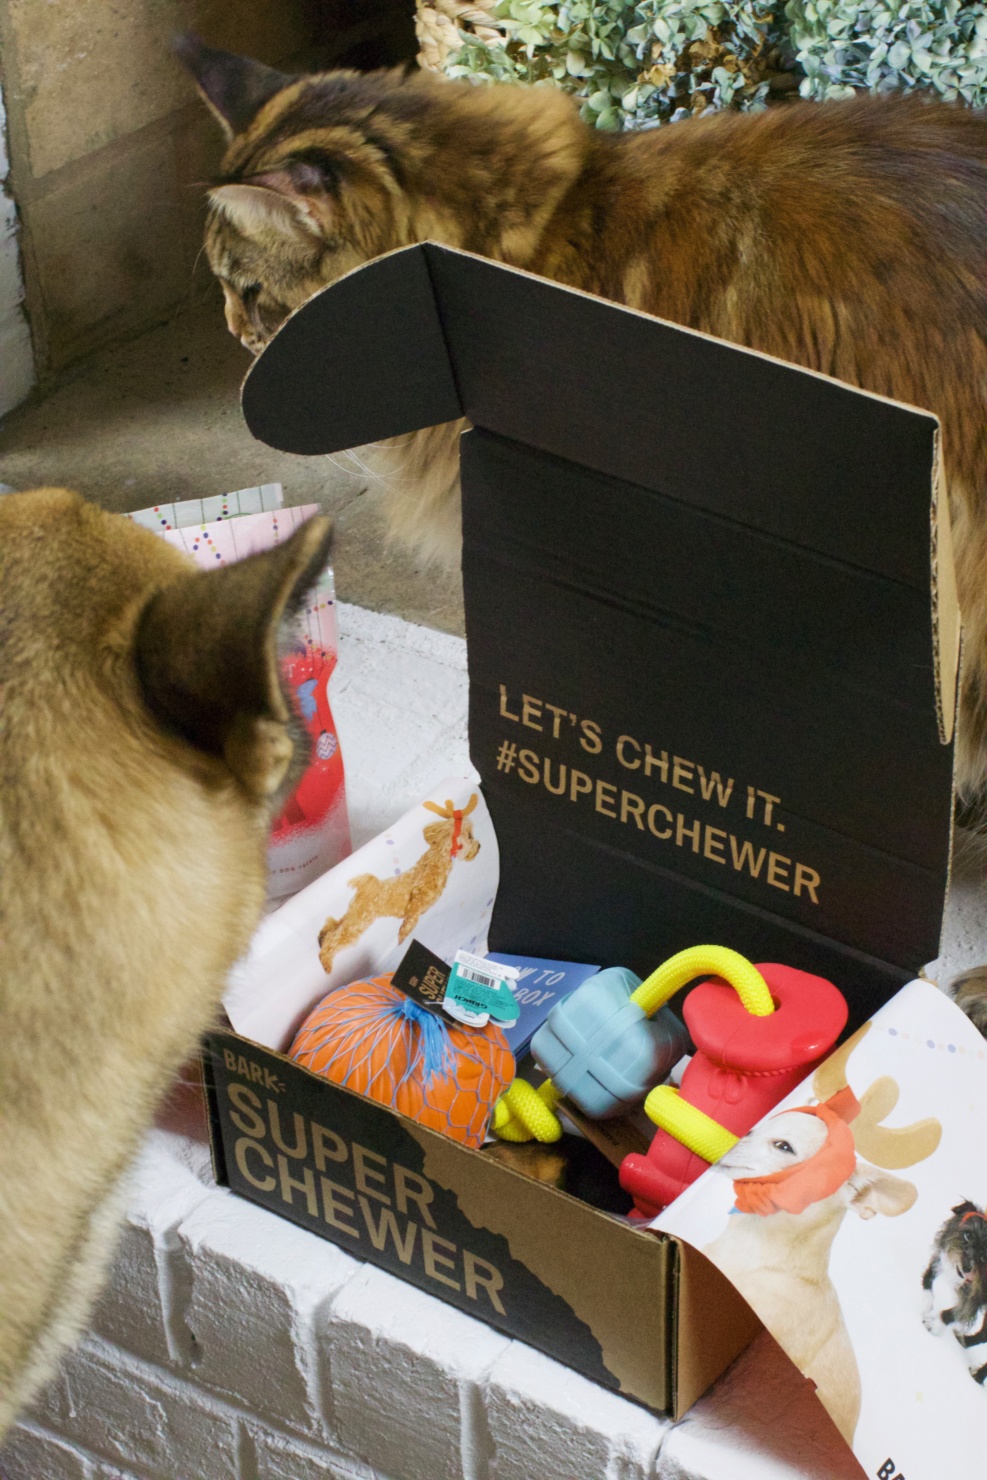 oscar from style at a certain age opens a super chewer barkbox